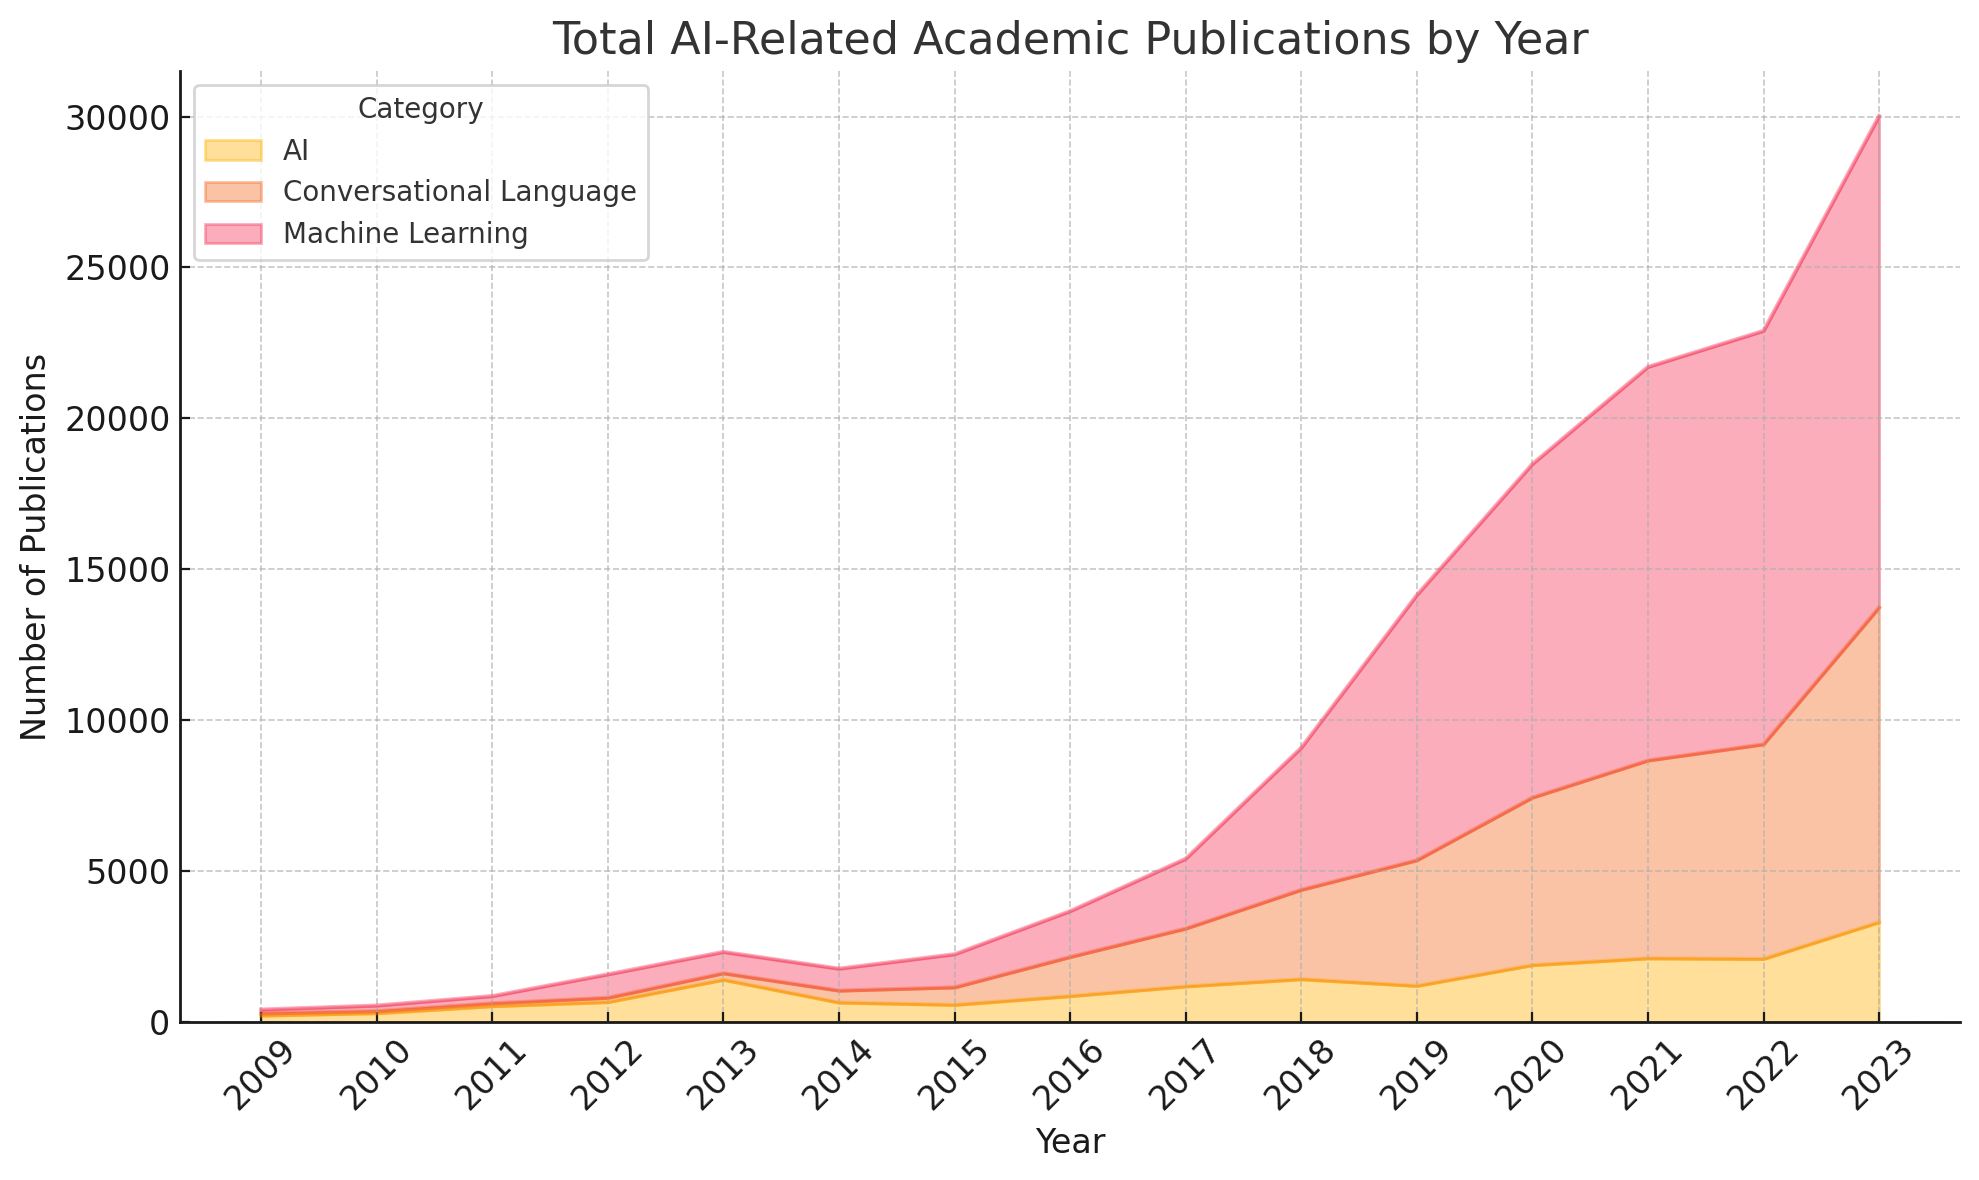 From 2009 until the end of 2023, the total academic papers published on AI-related topics has grown from a few hundred to over 30000 per year